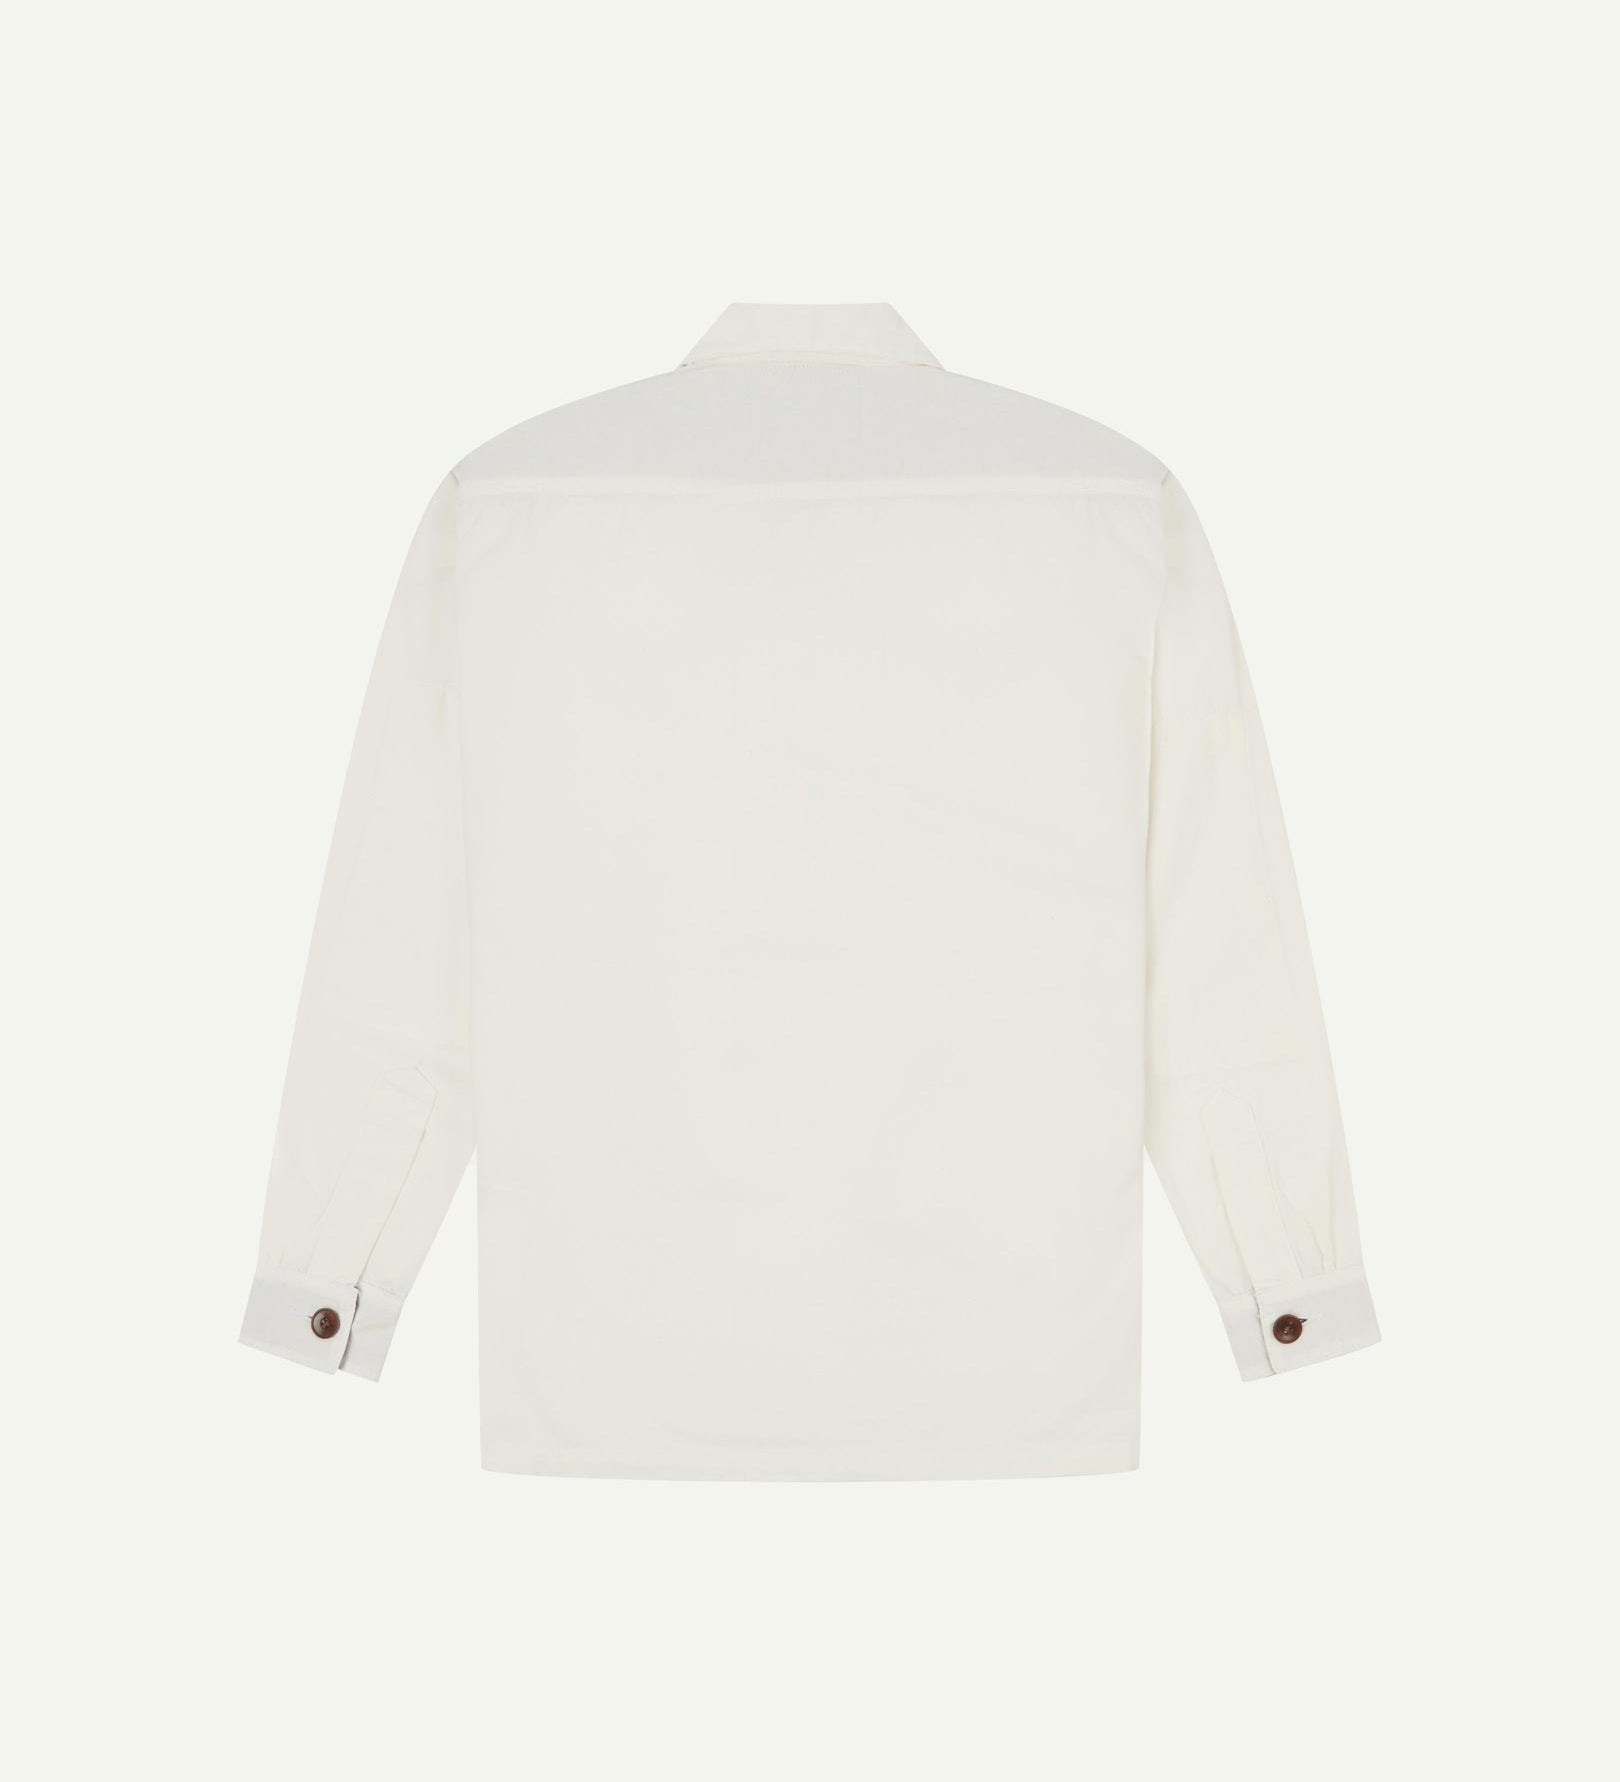 Reverse of cream buttoned organic cotton workshirt from Uskees showing reinforced elbows, tailored cuffs and boxy silhouette.